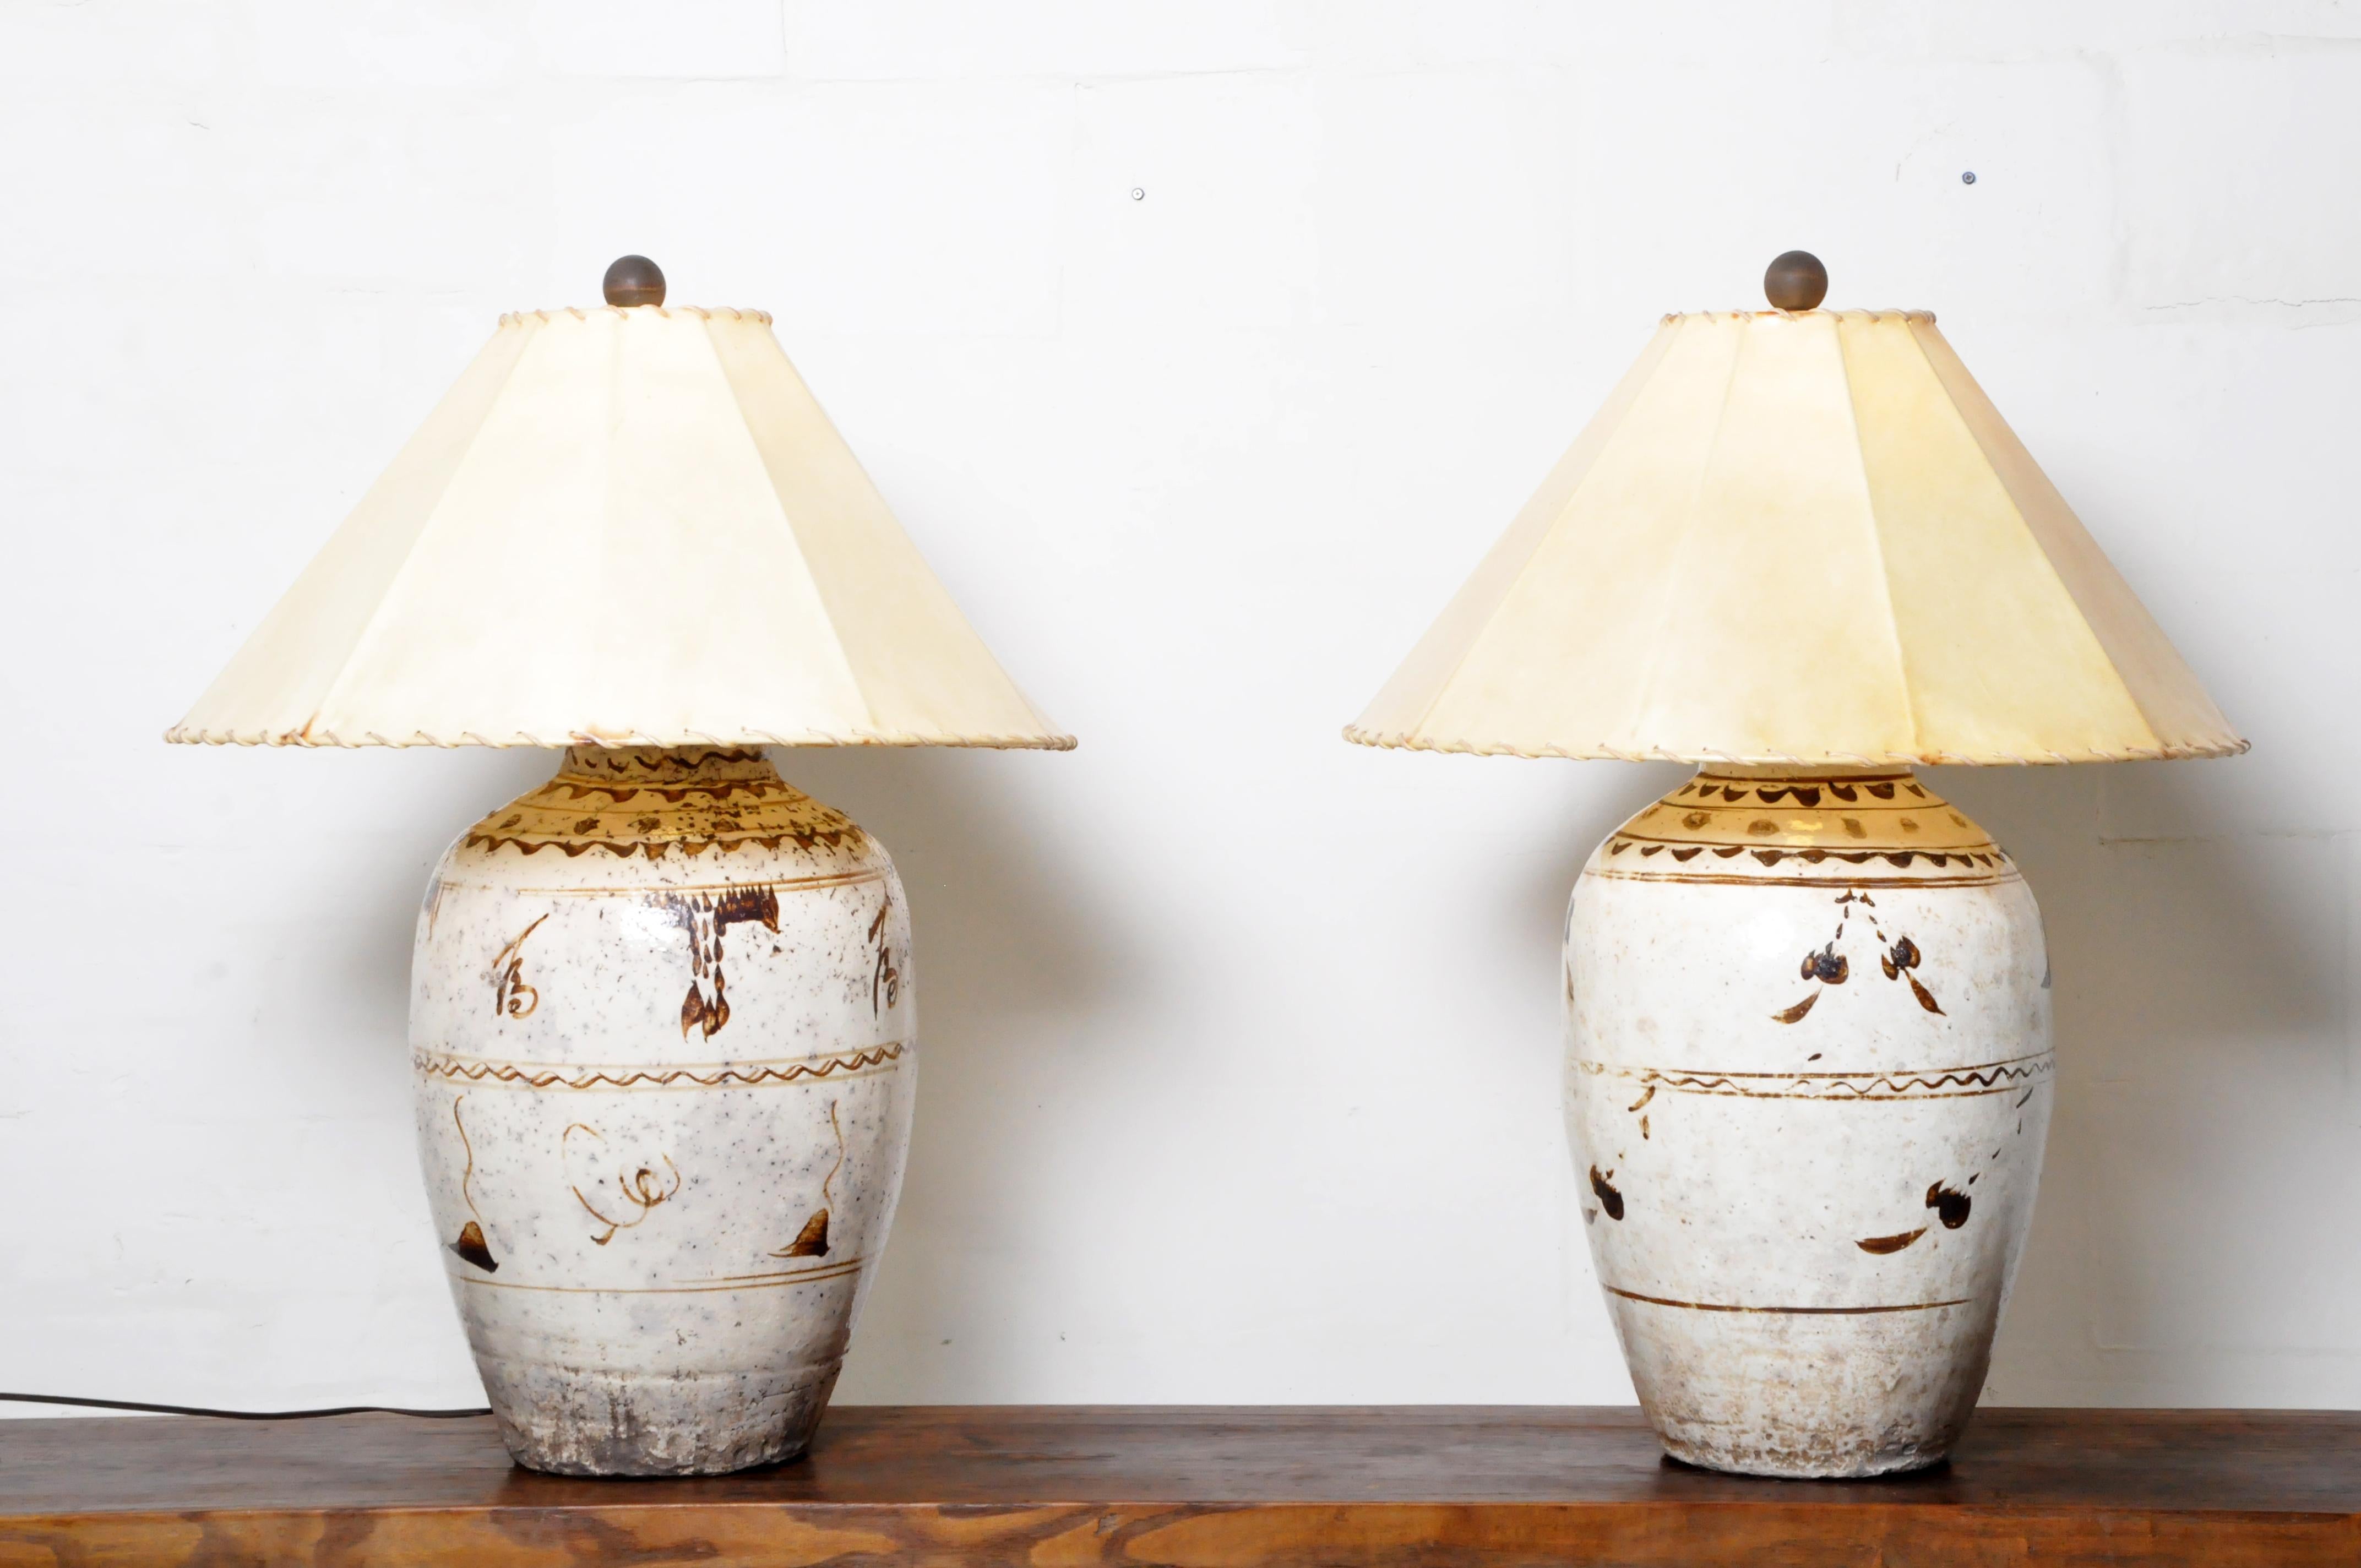 Large, solidly potted sixteenth-century Ming Period Cizhou pottery vases converted into lamps. The vases are decorated in the traditional manner with caramel glazes upon a cream ground. Once used to hold fortified Chinese wines and liquors. Wear